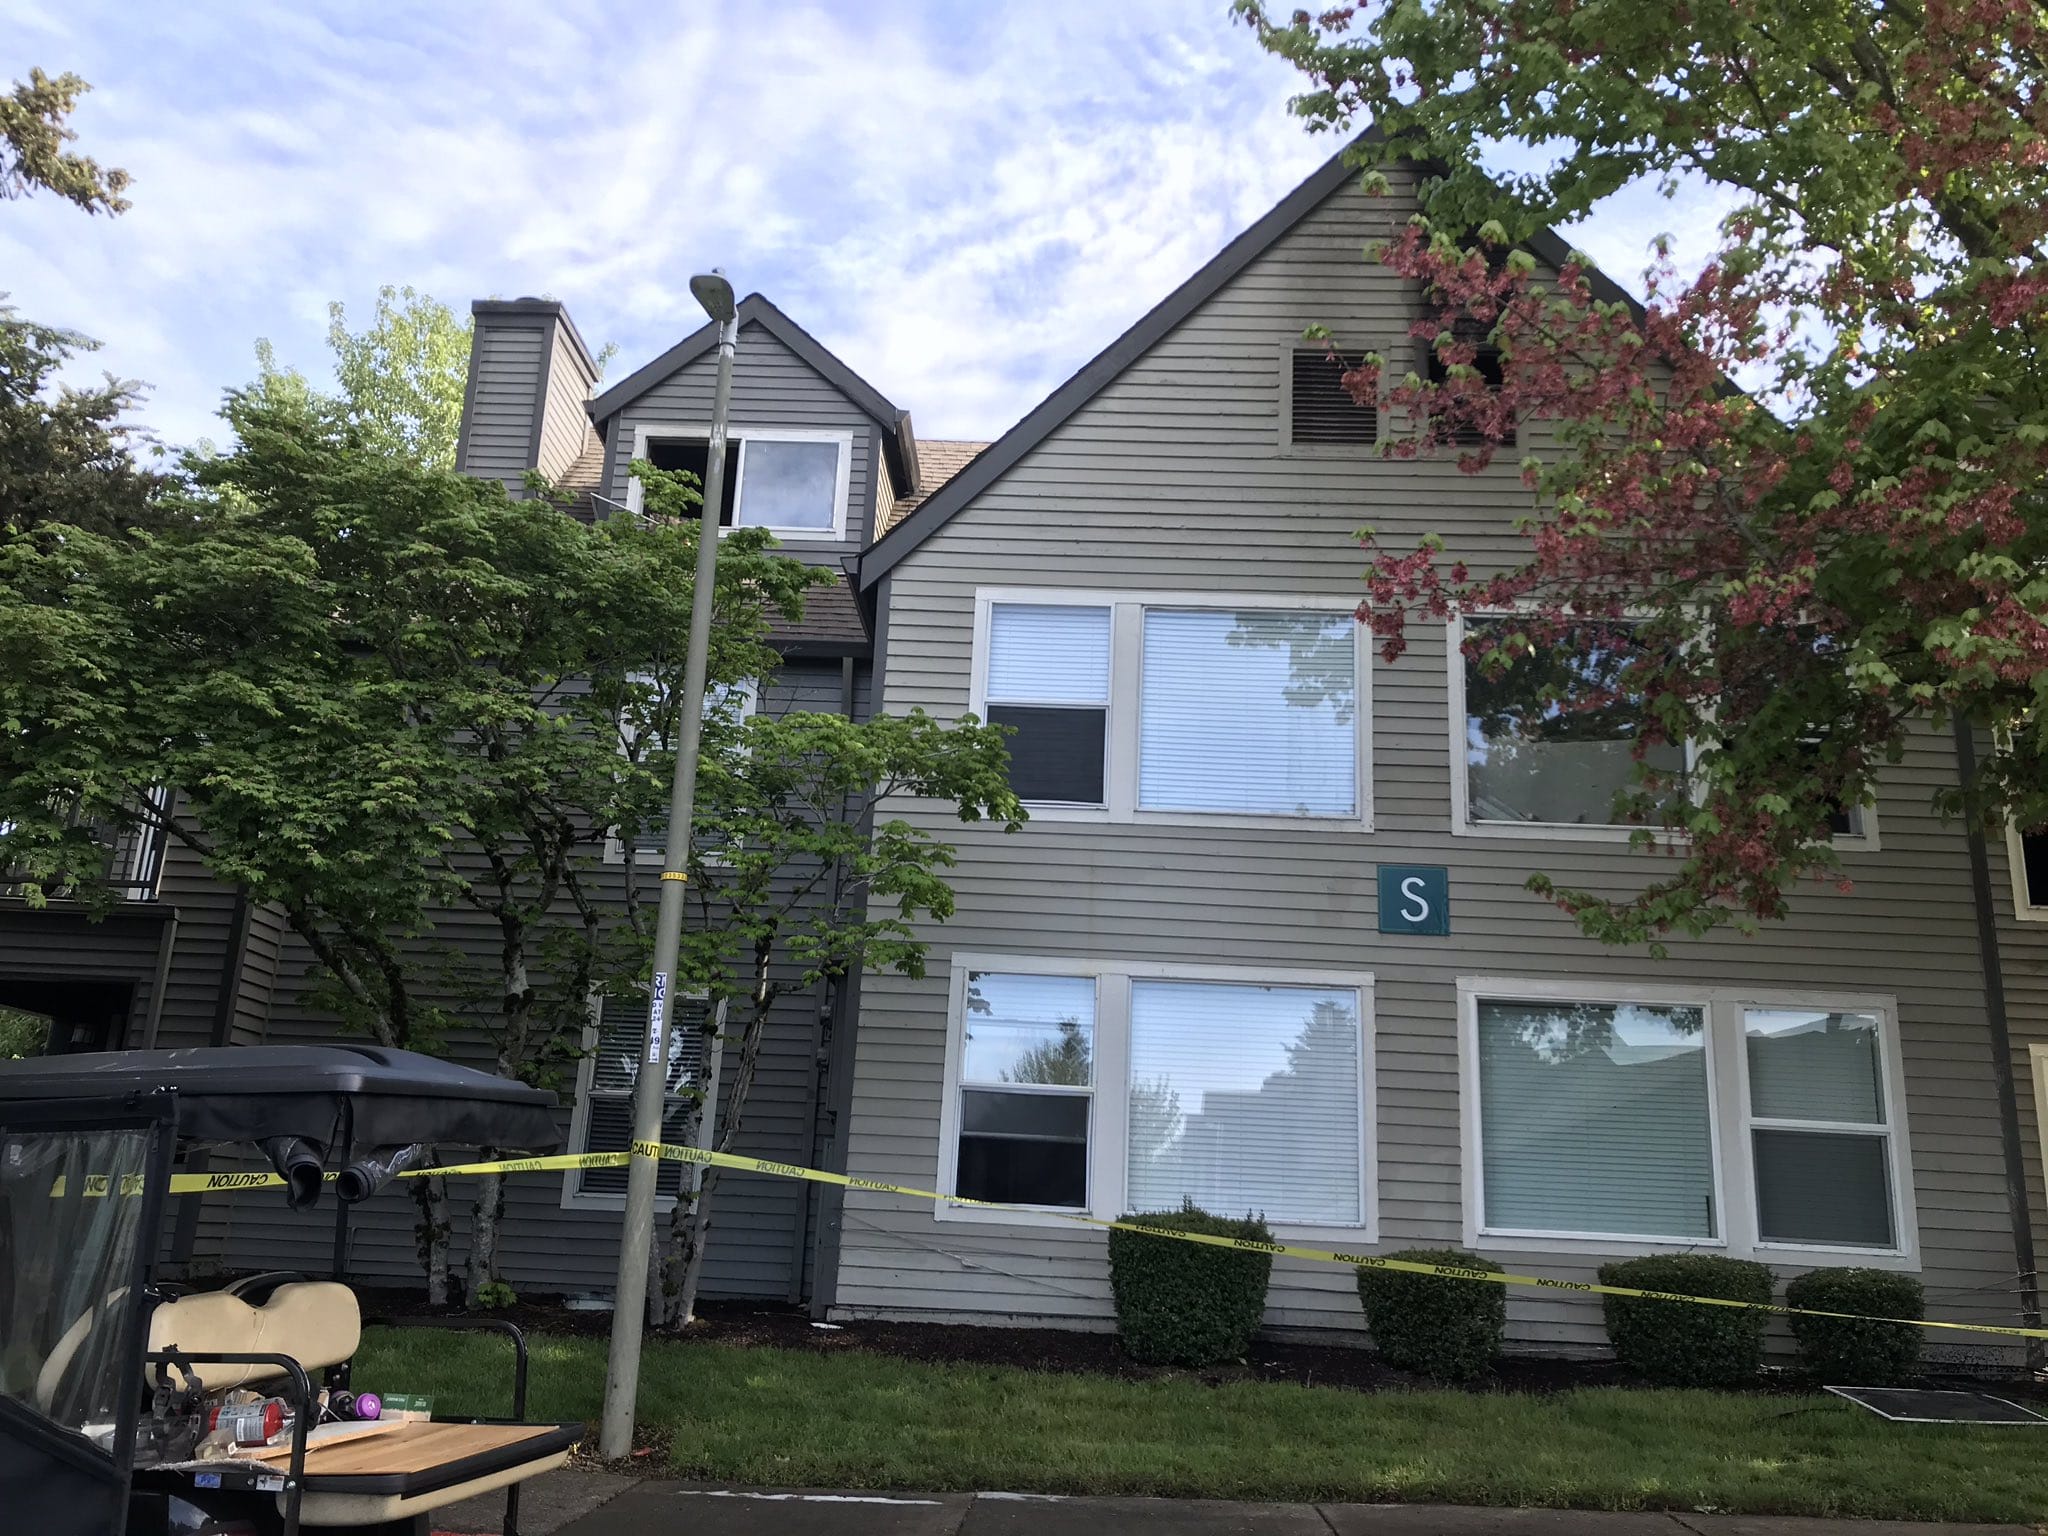 A two-alarm fire early Monday morning damaged an apartment complex in east Vancouver and displaced families in eight units, according to the Vancouver Fire Department.